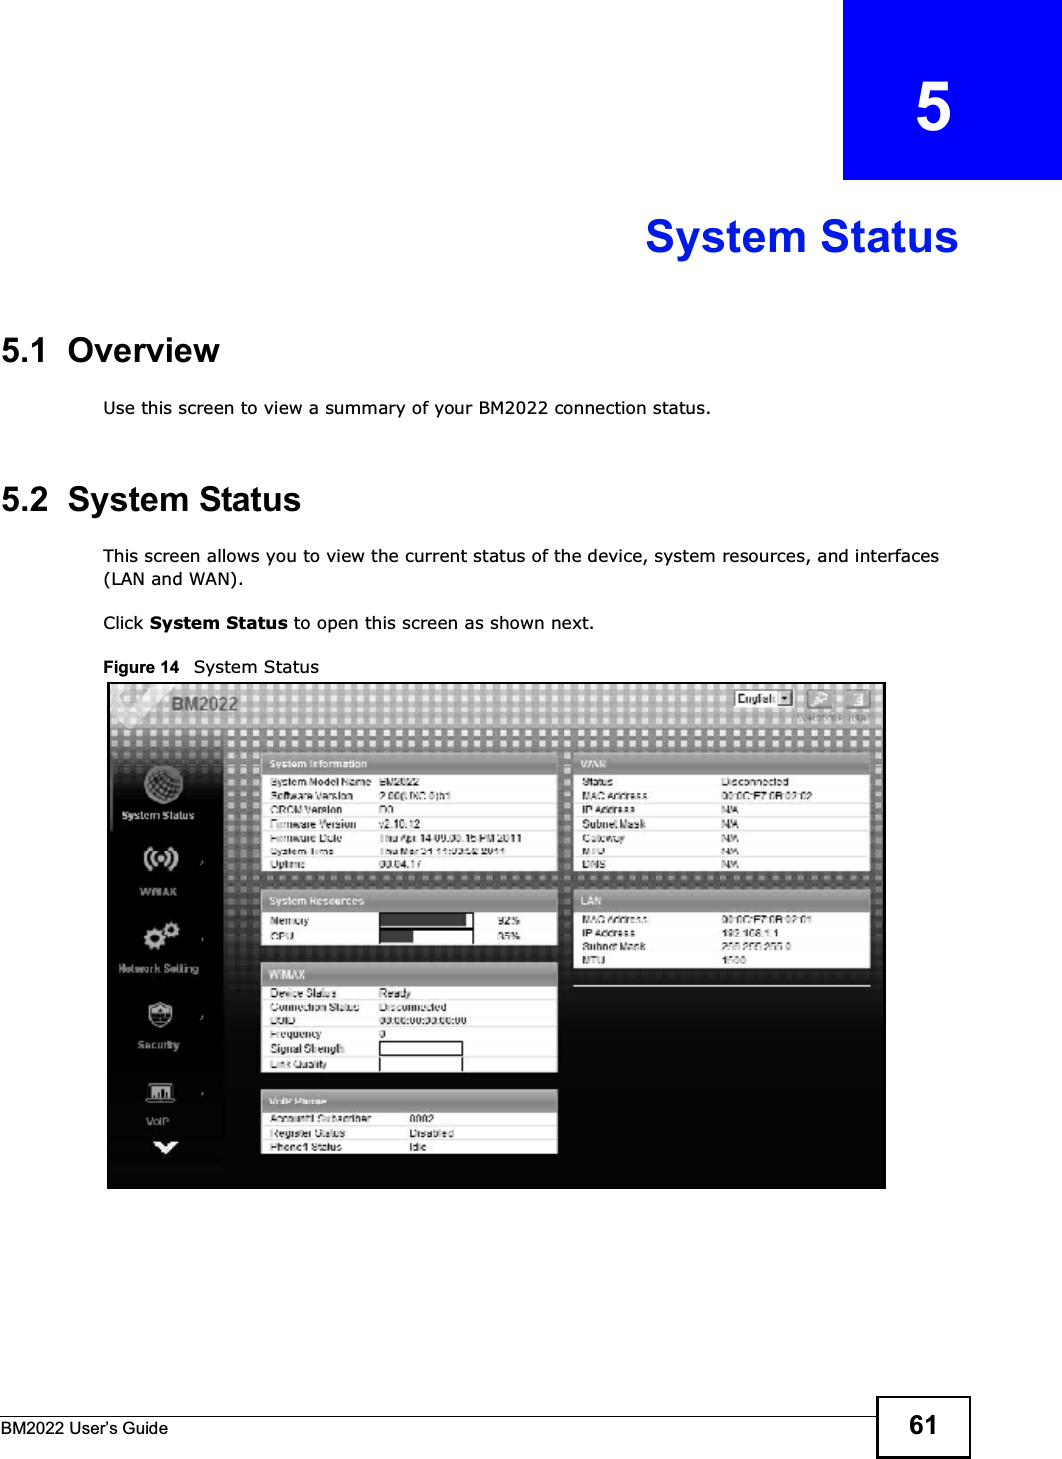 BM2022 Users Guide 61CHAPTER   5System Status5.1  OverviewUse this screen to view a summary of your BM2022 connection status.5.2  System StatusThis screen allows you to view the current status of the device, system resources, and interfaces (LAN and WAN).Click System Status to open this screen as shown next.Figure 14   System Status